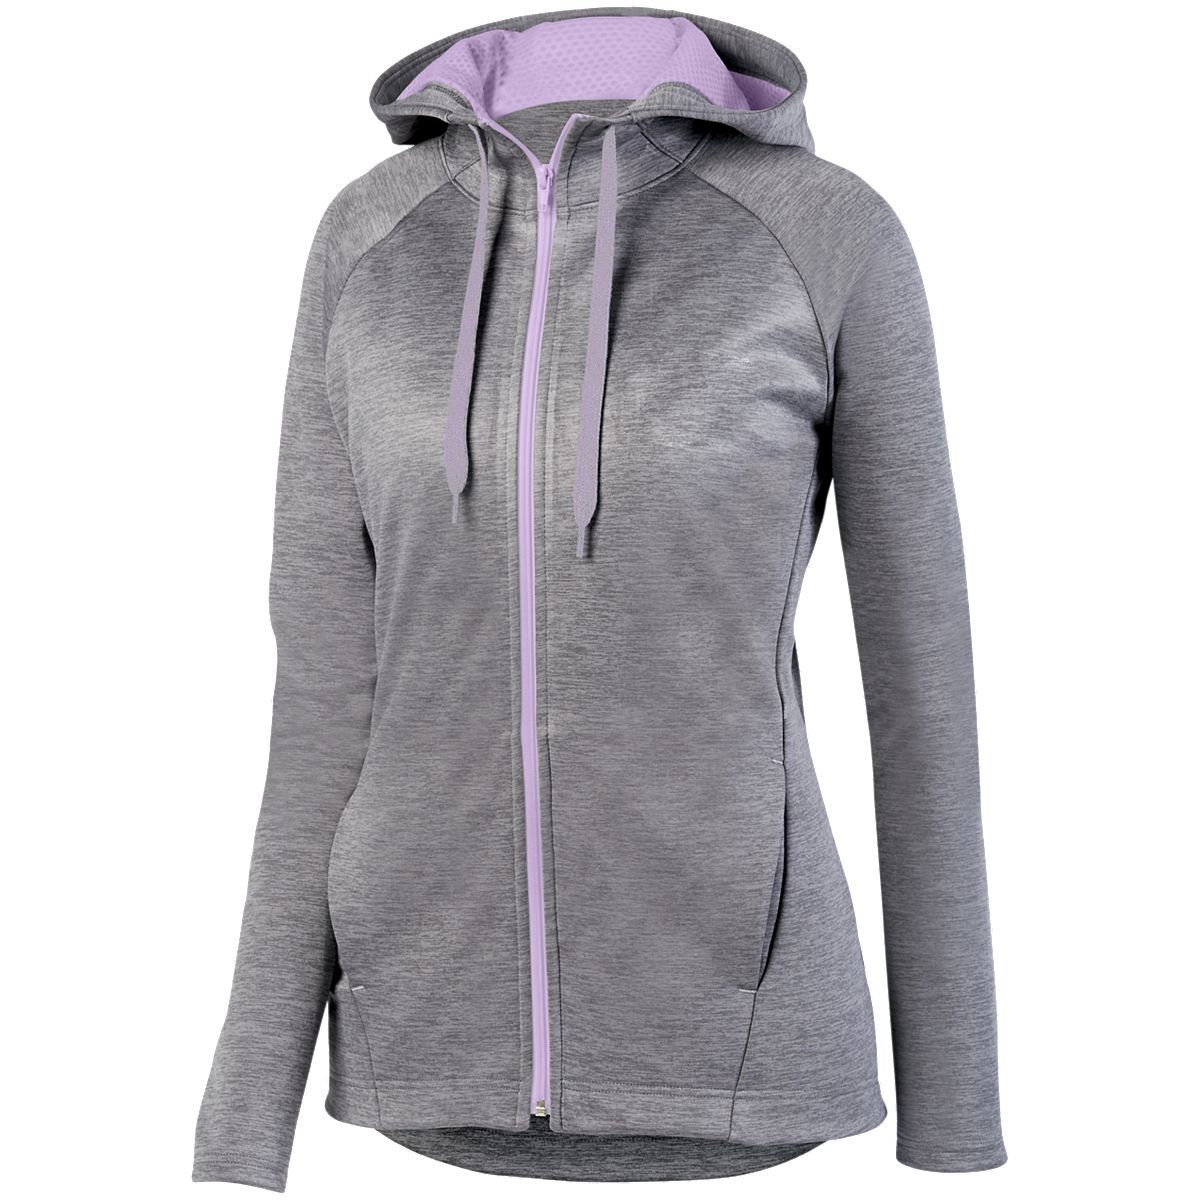 Augusta Sportswear Ladies Zoe Tonal Heather Full Zip Hoodie in Graphite/Light Lavender  -Part of the Ladies, Augusta-Products, Shirts, Tonal-Fleece-Collection product lines at KanaleyCreations.com